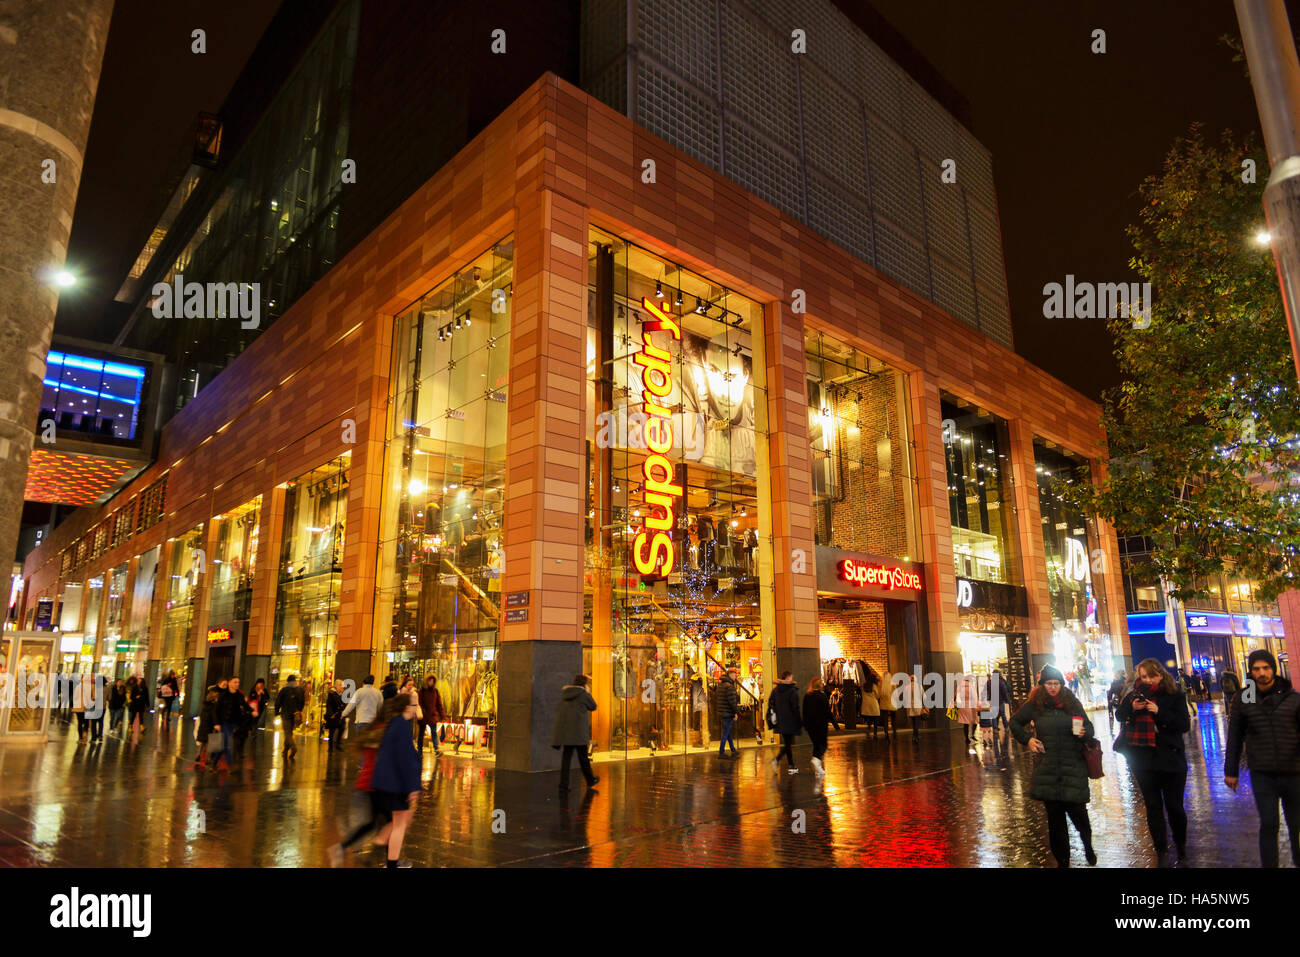 Superdry Shop High Resolution Stock Photography and Images - Alamy